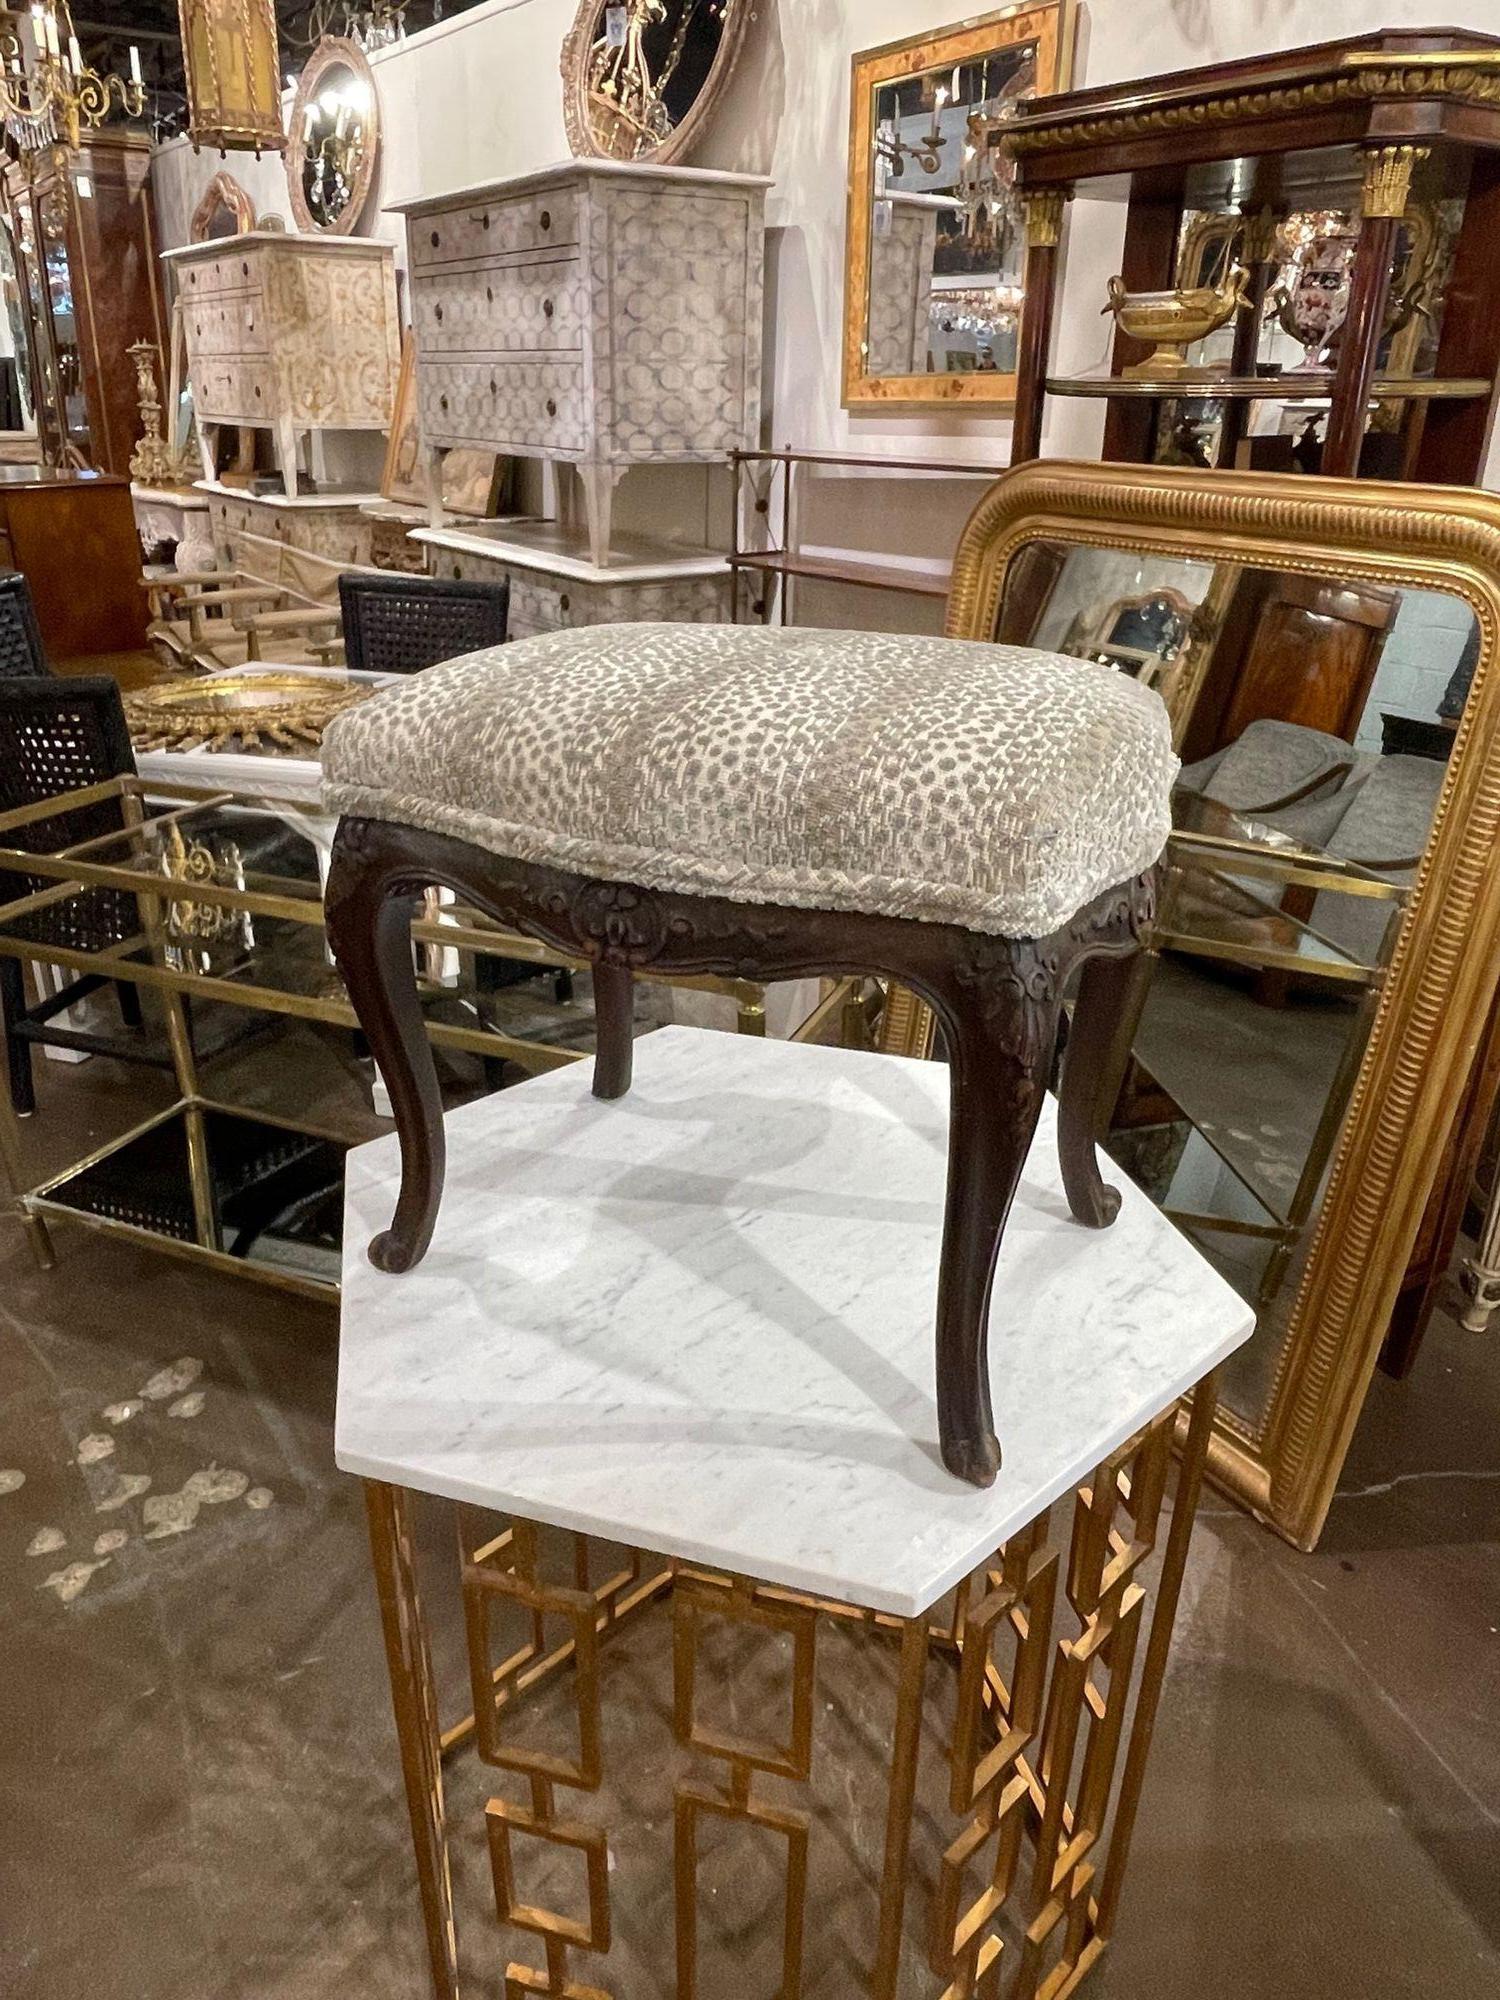 Lovely 19th century French Louis XV style carved walnut stool. Upholstered in a beautiful velvet fabric with a leopard print. Creates an elegant touch!